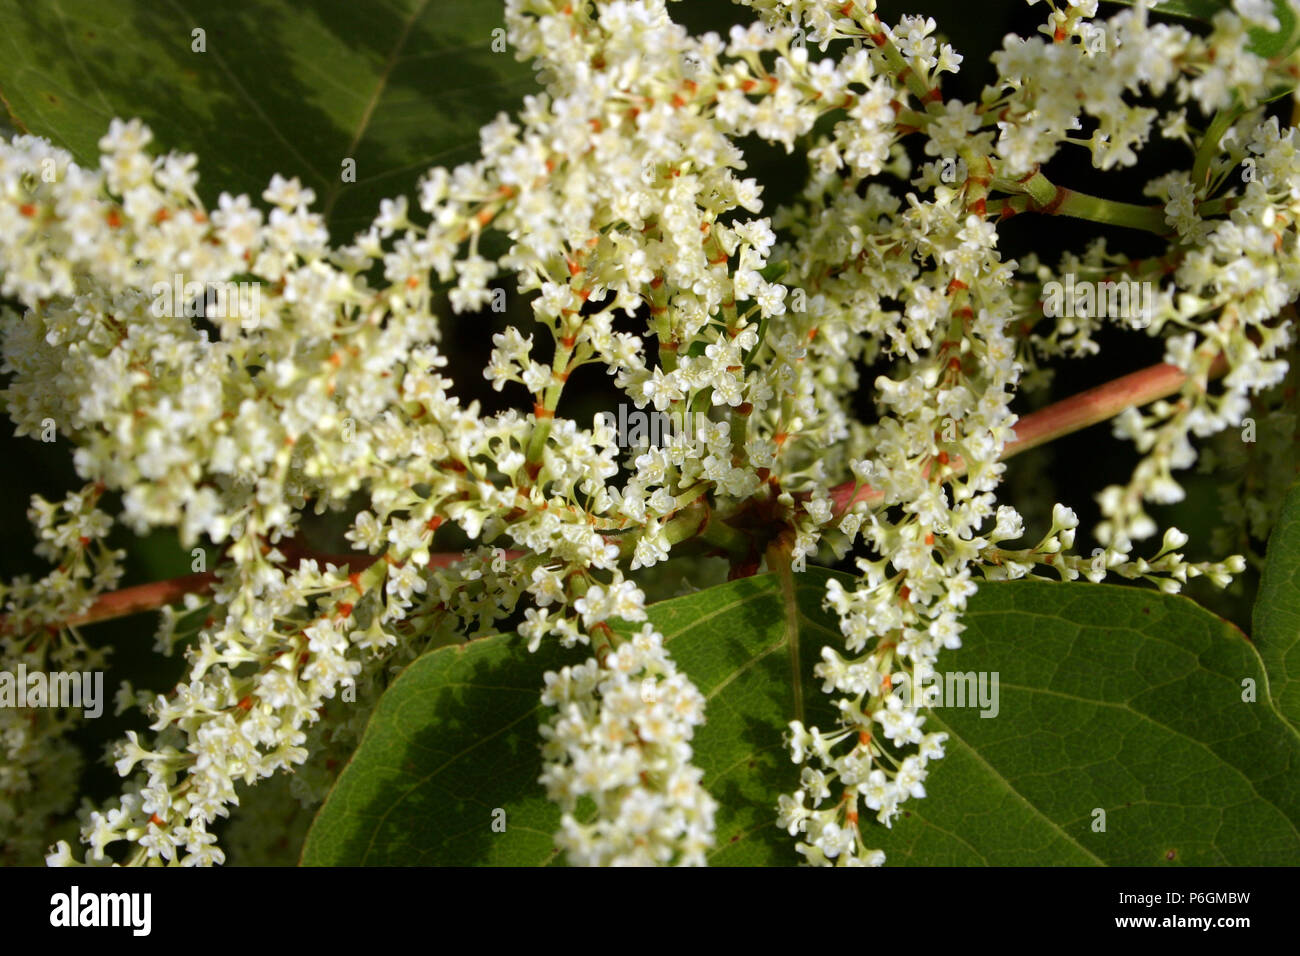 Close-up of a Reynoutria sachalinensis (Giant knotweed) in bloom Stock Photo